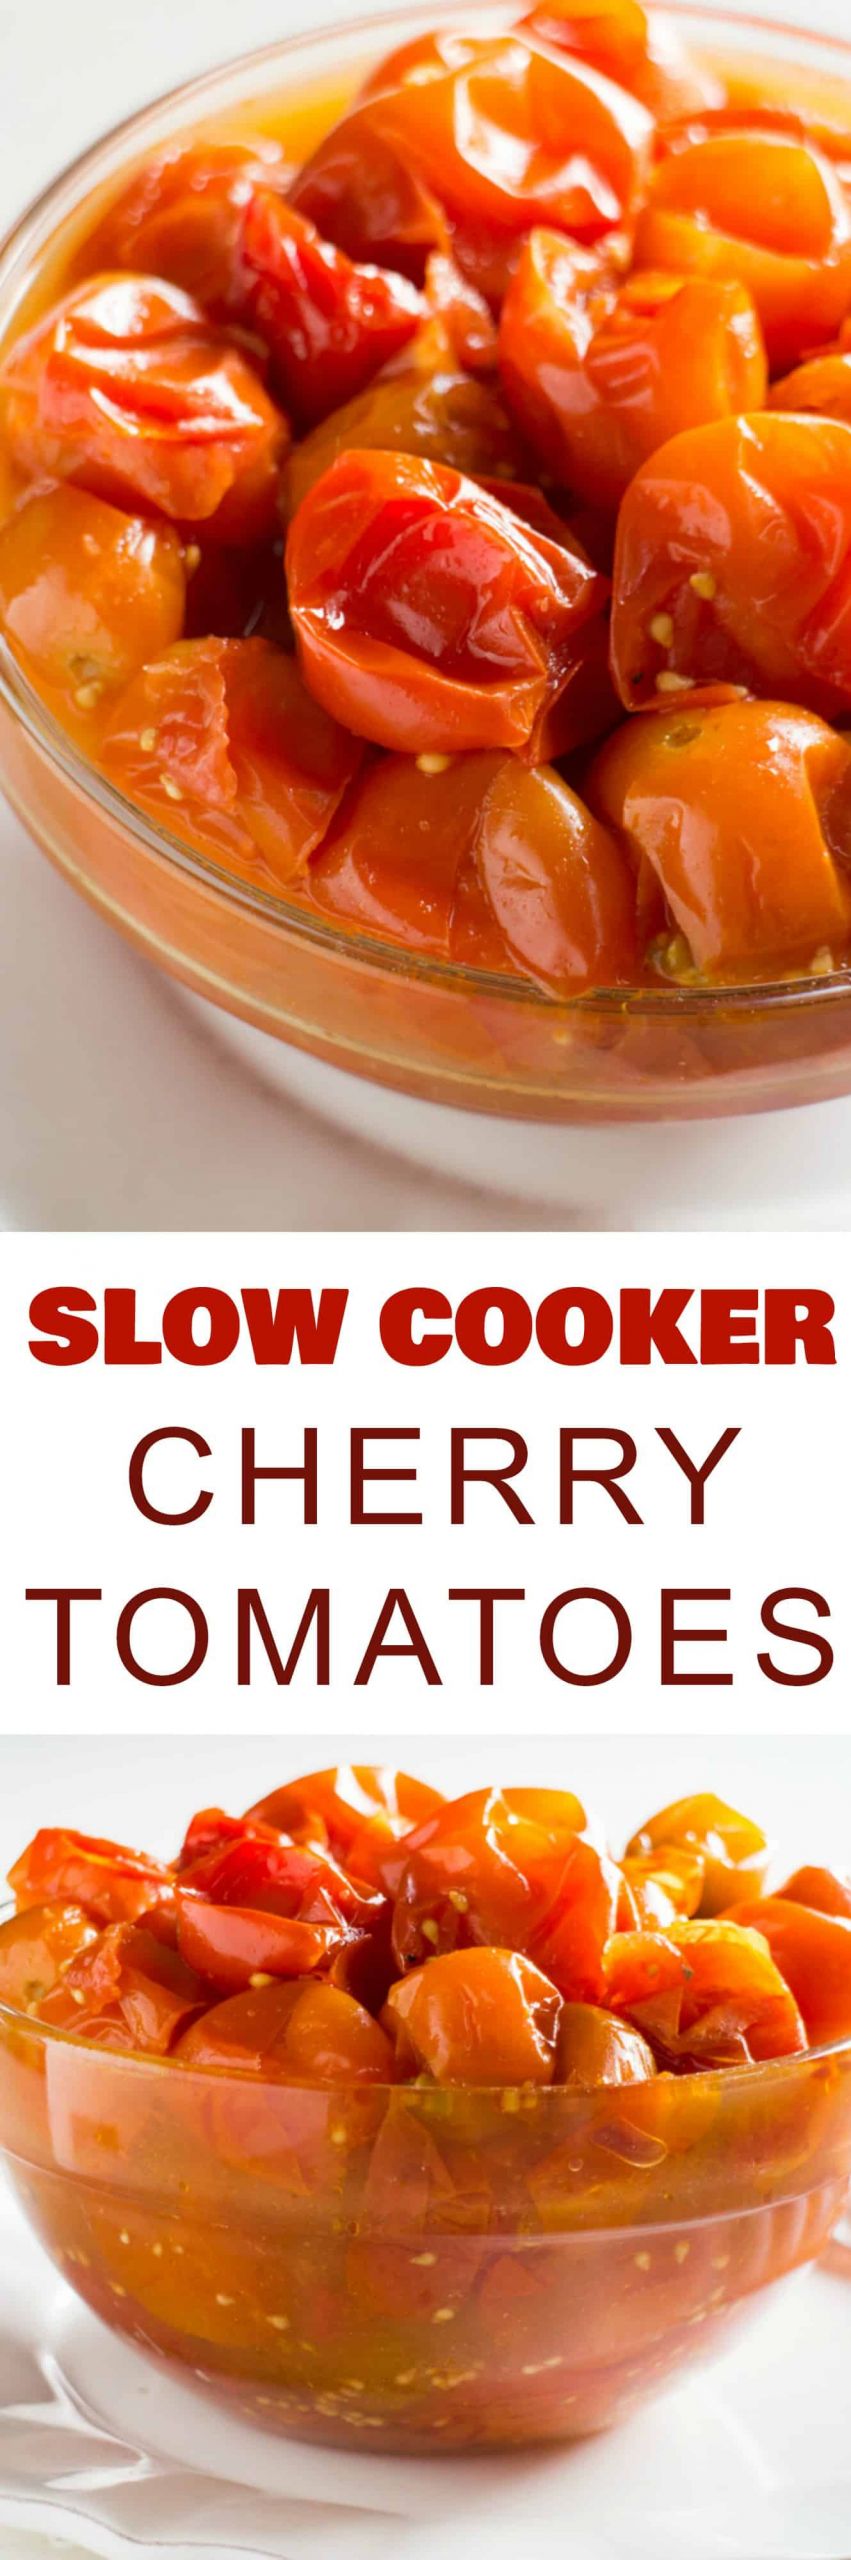 Canning Cherry Tomatoes Recipes
 Slow Cooker Cherry Tomatoes Recipe Make them in the